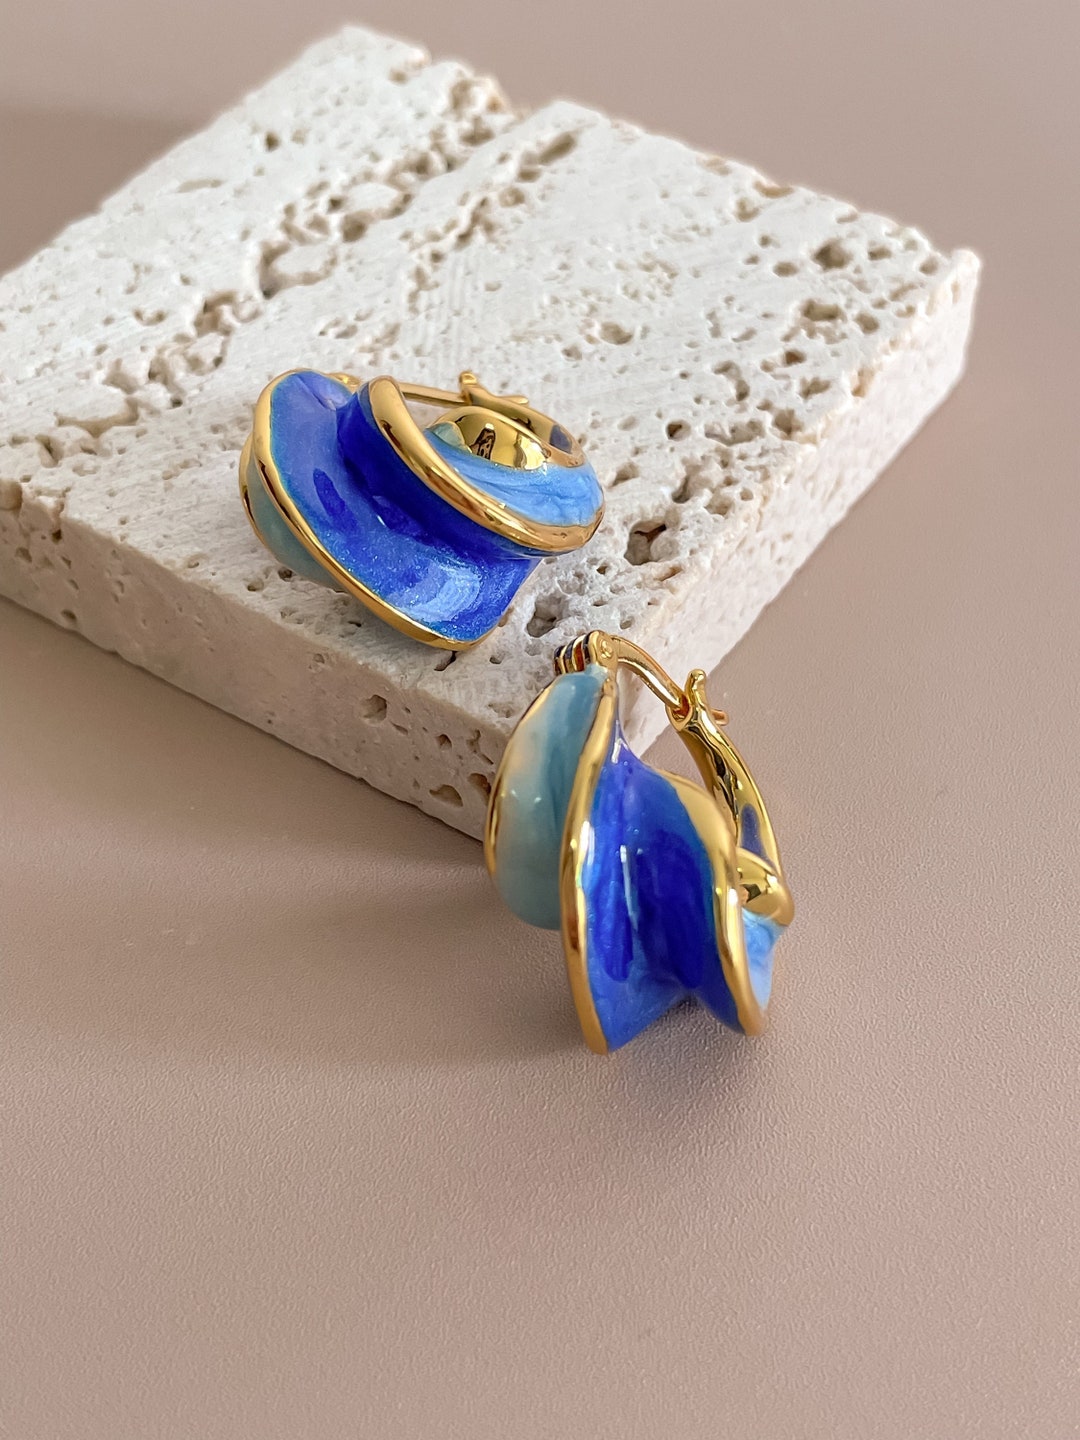 Blue Enamel and Gold Spiral Earrings Vintage Style Hoops by Subtle ...